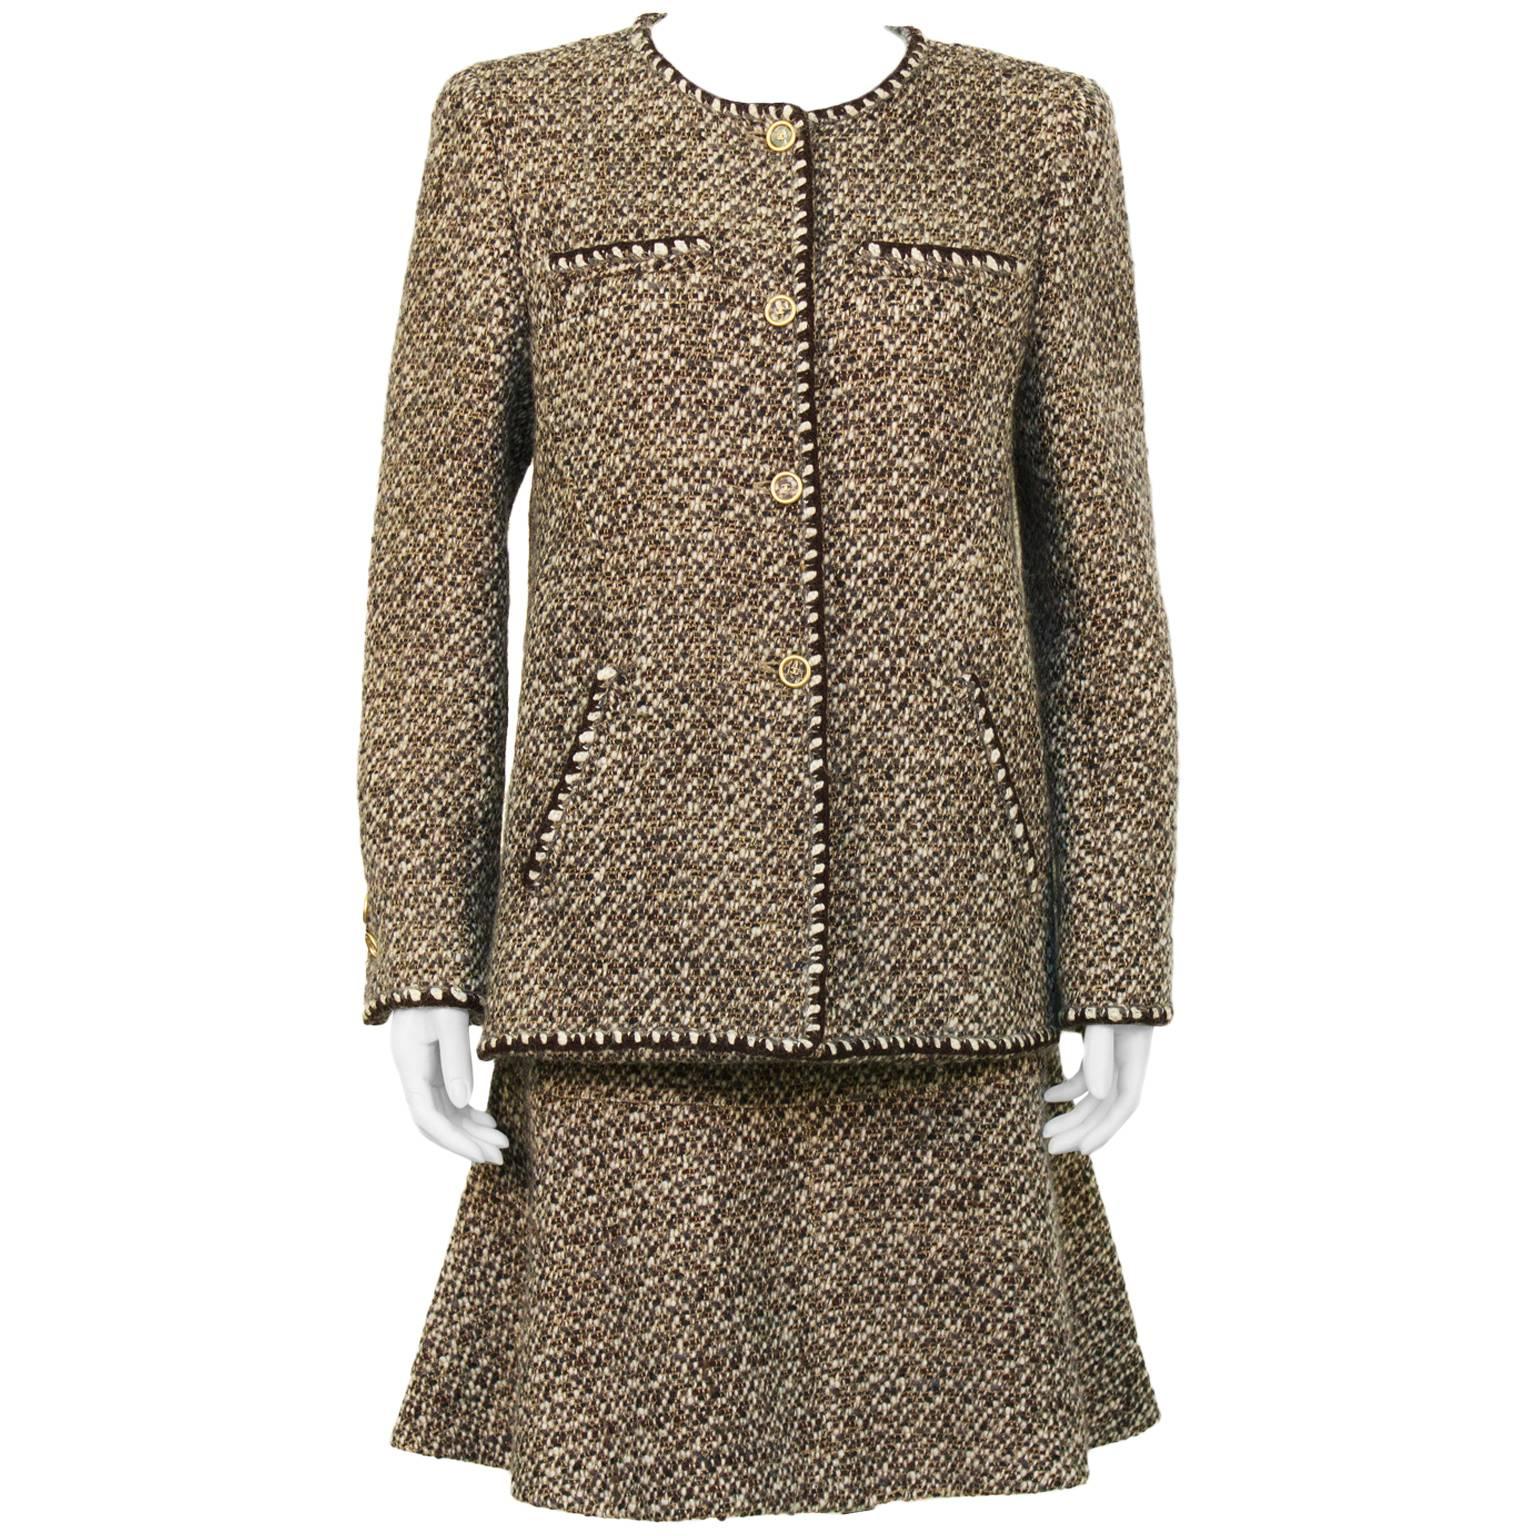 2001 Fall Chanel Brown & White Boucle Skirt Suit 